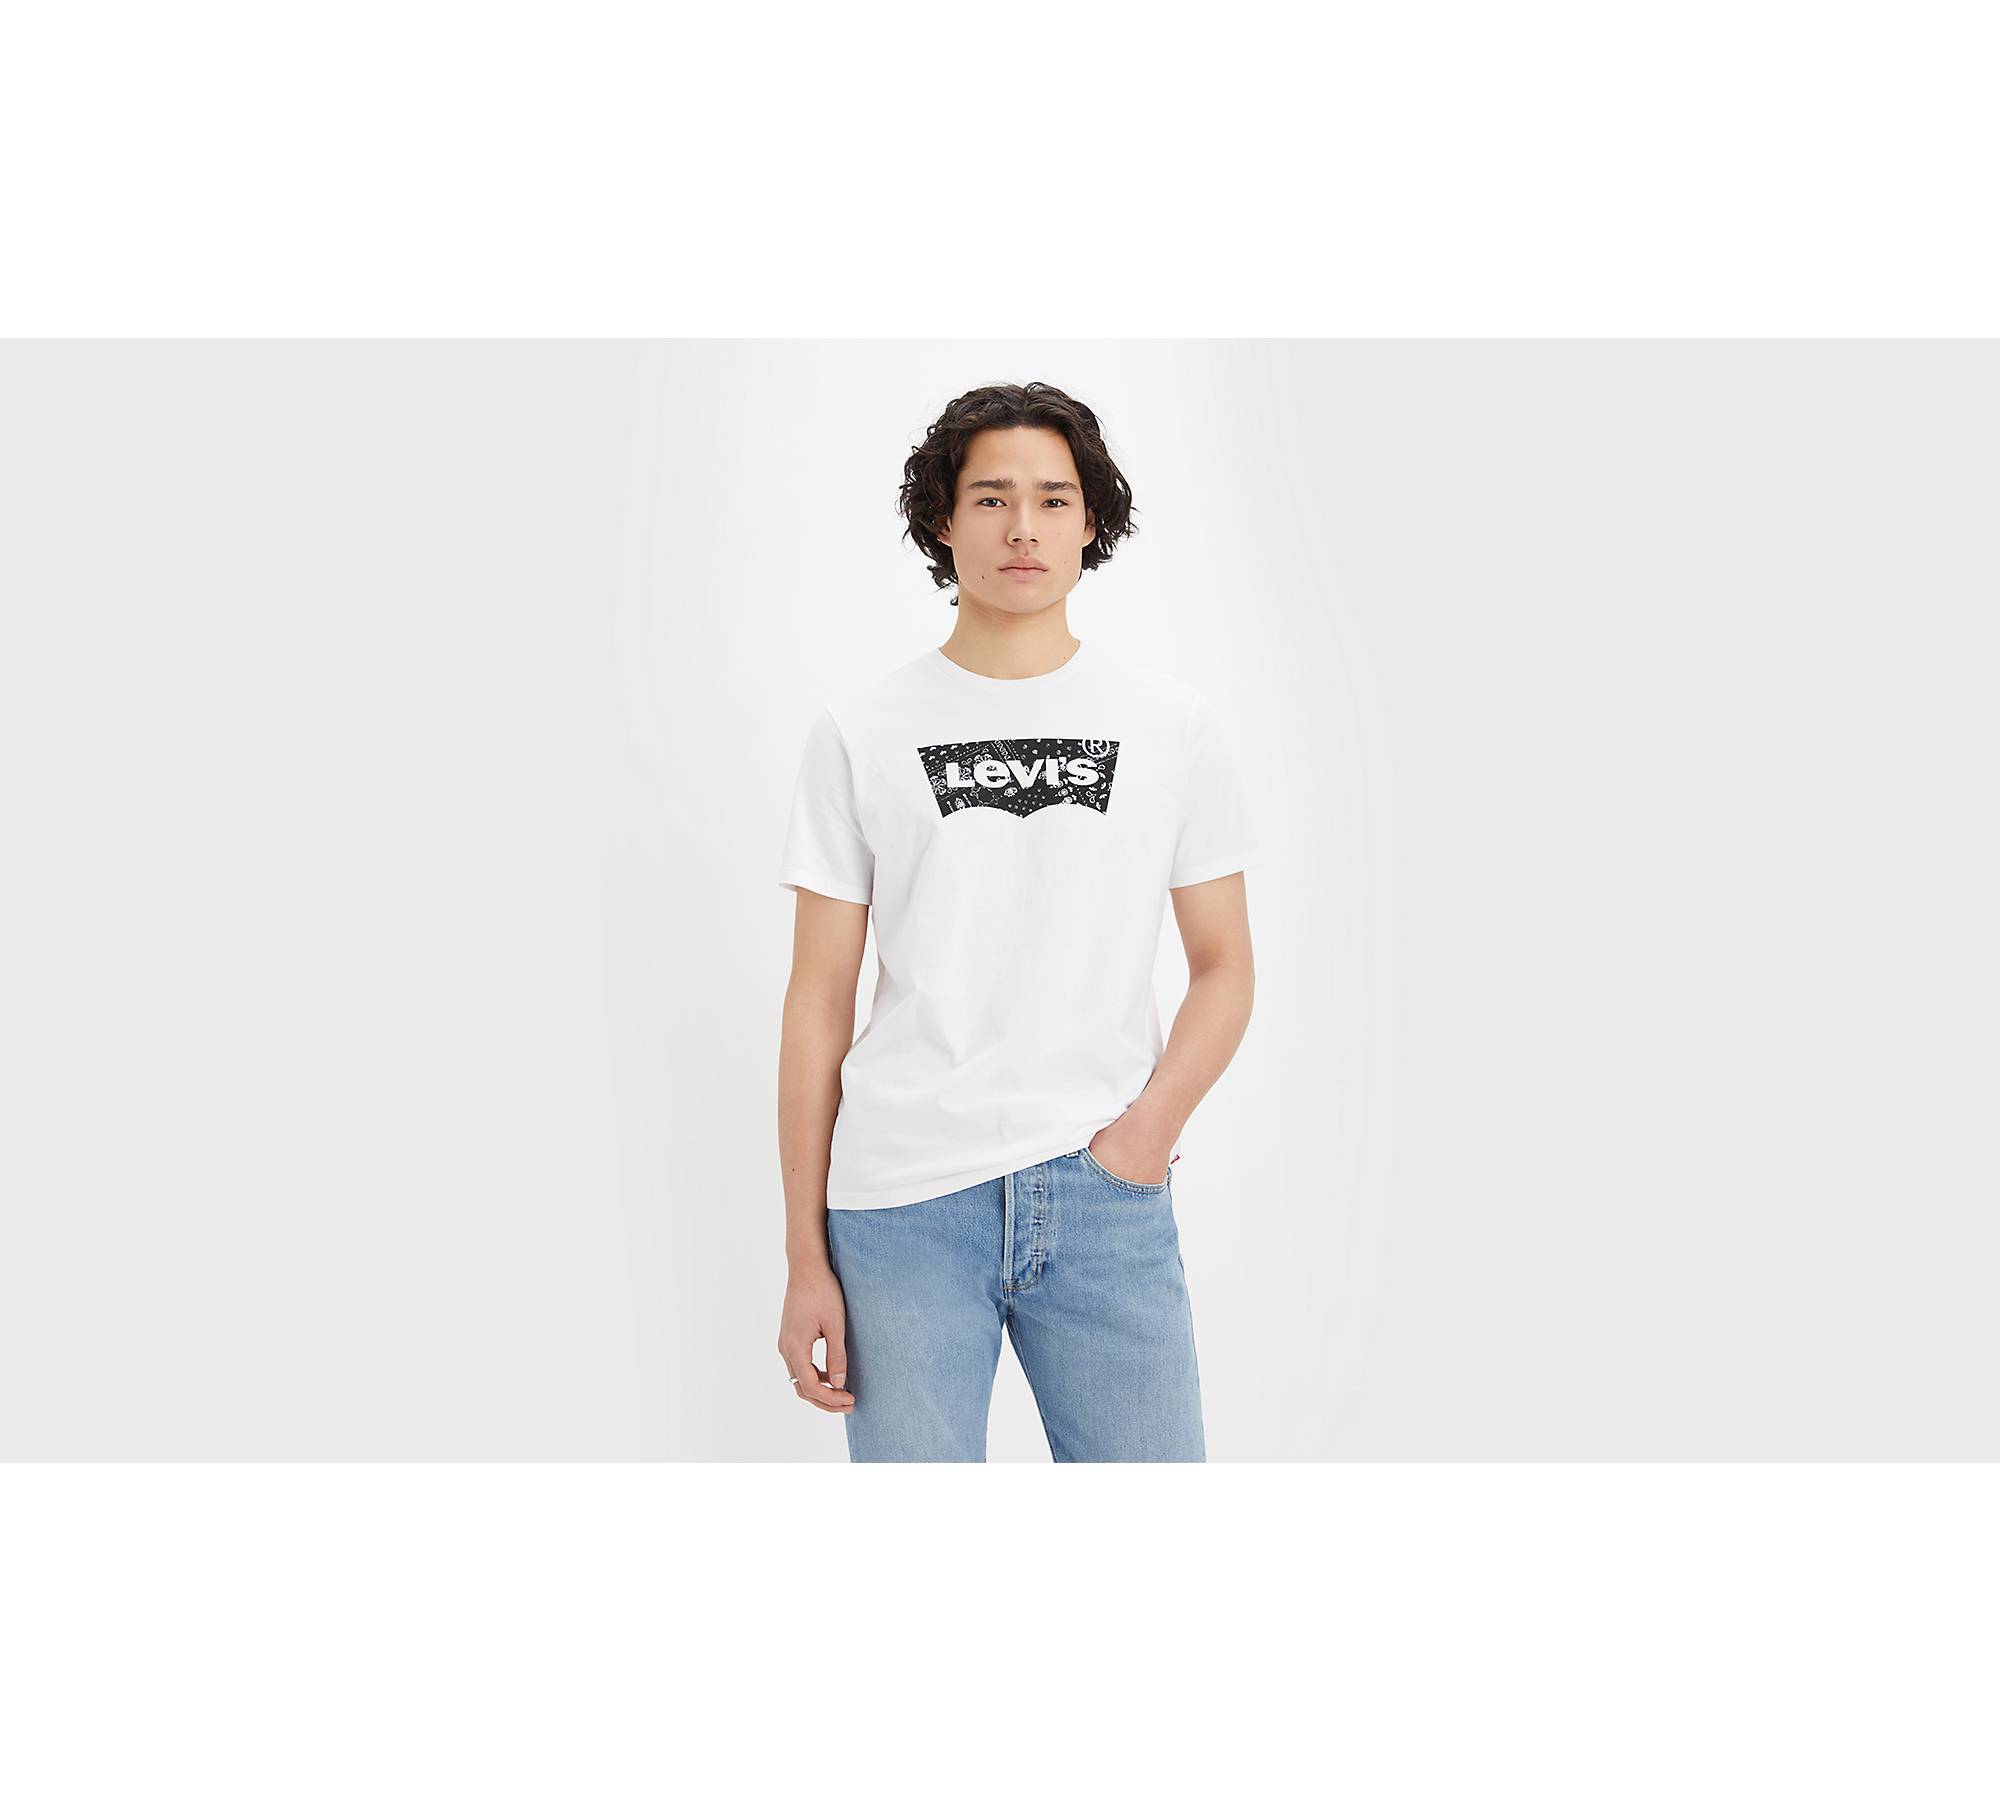 Plain Classic White  Kids T-Shirt for Sale by astudent